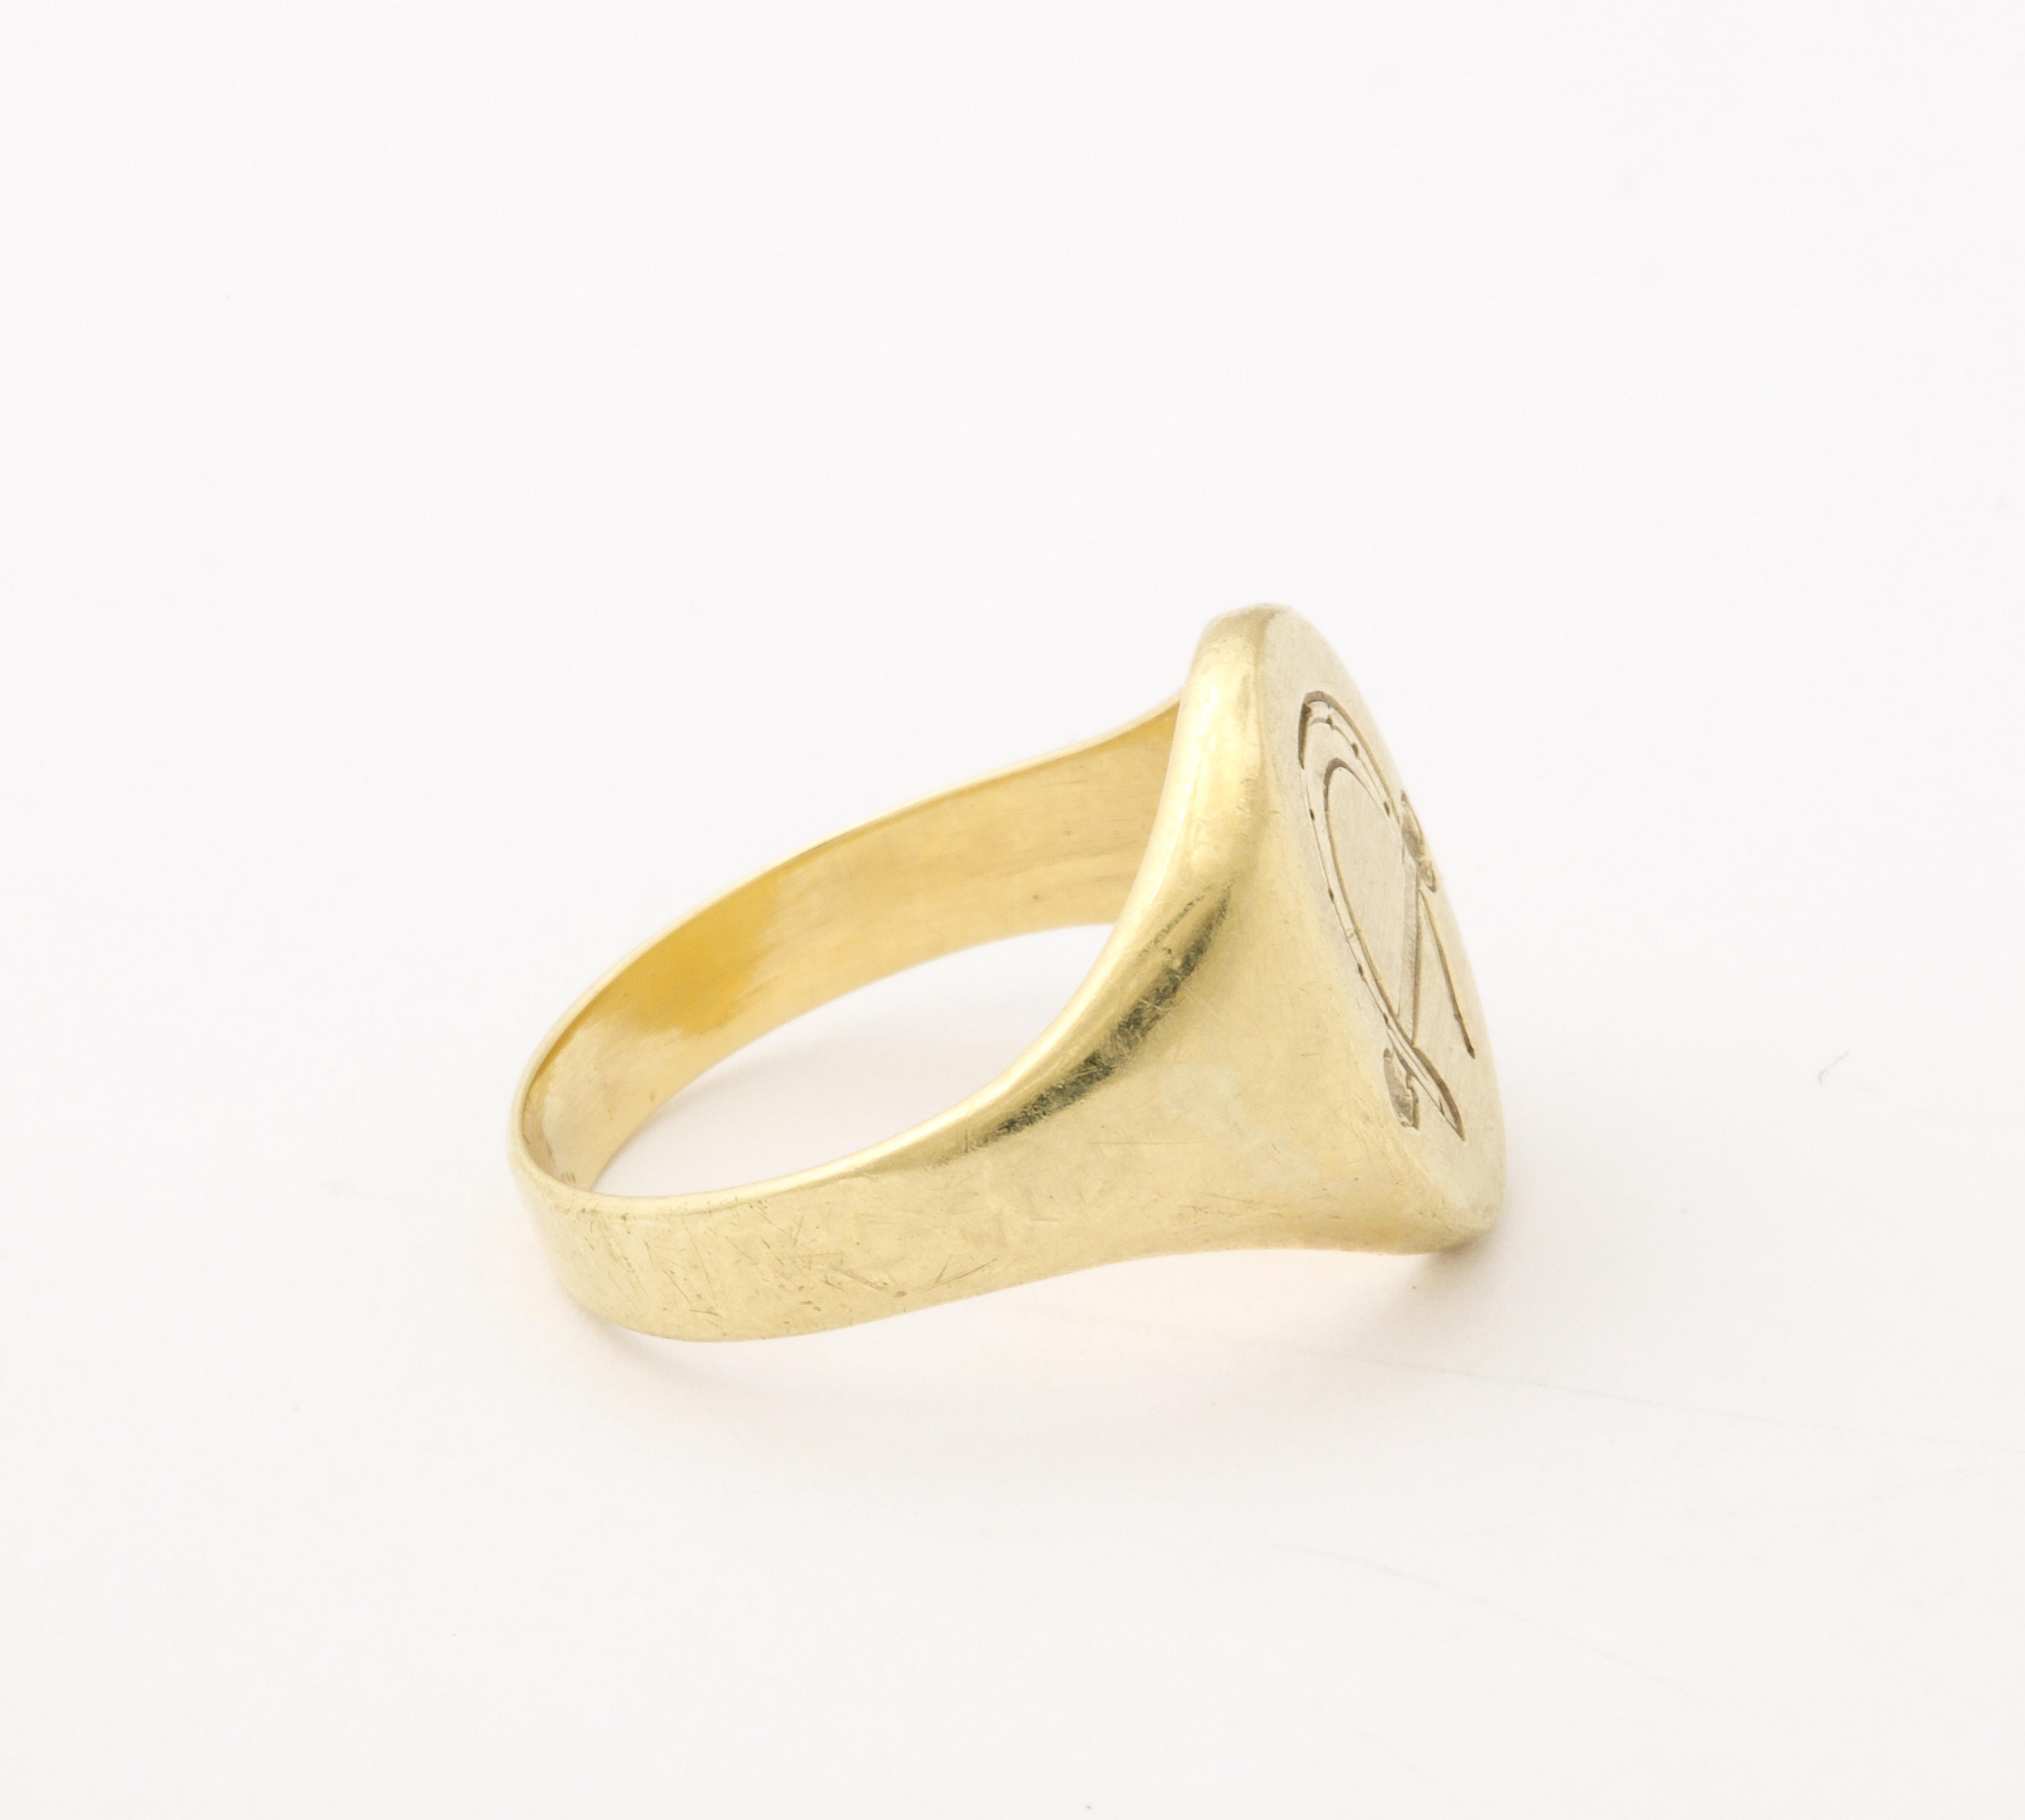 A Retro Equestrian or Lucky Signet Ring with Horseshoe and Crop 14 Kt Gold For Sale 3